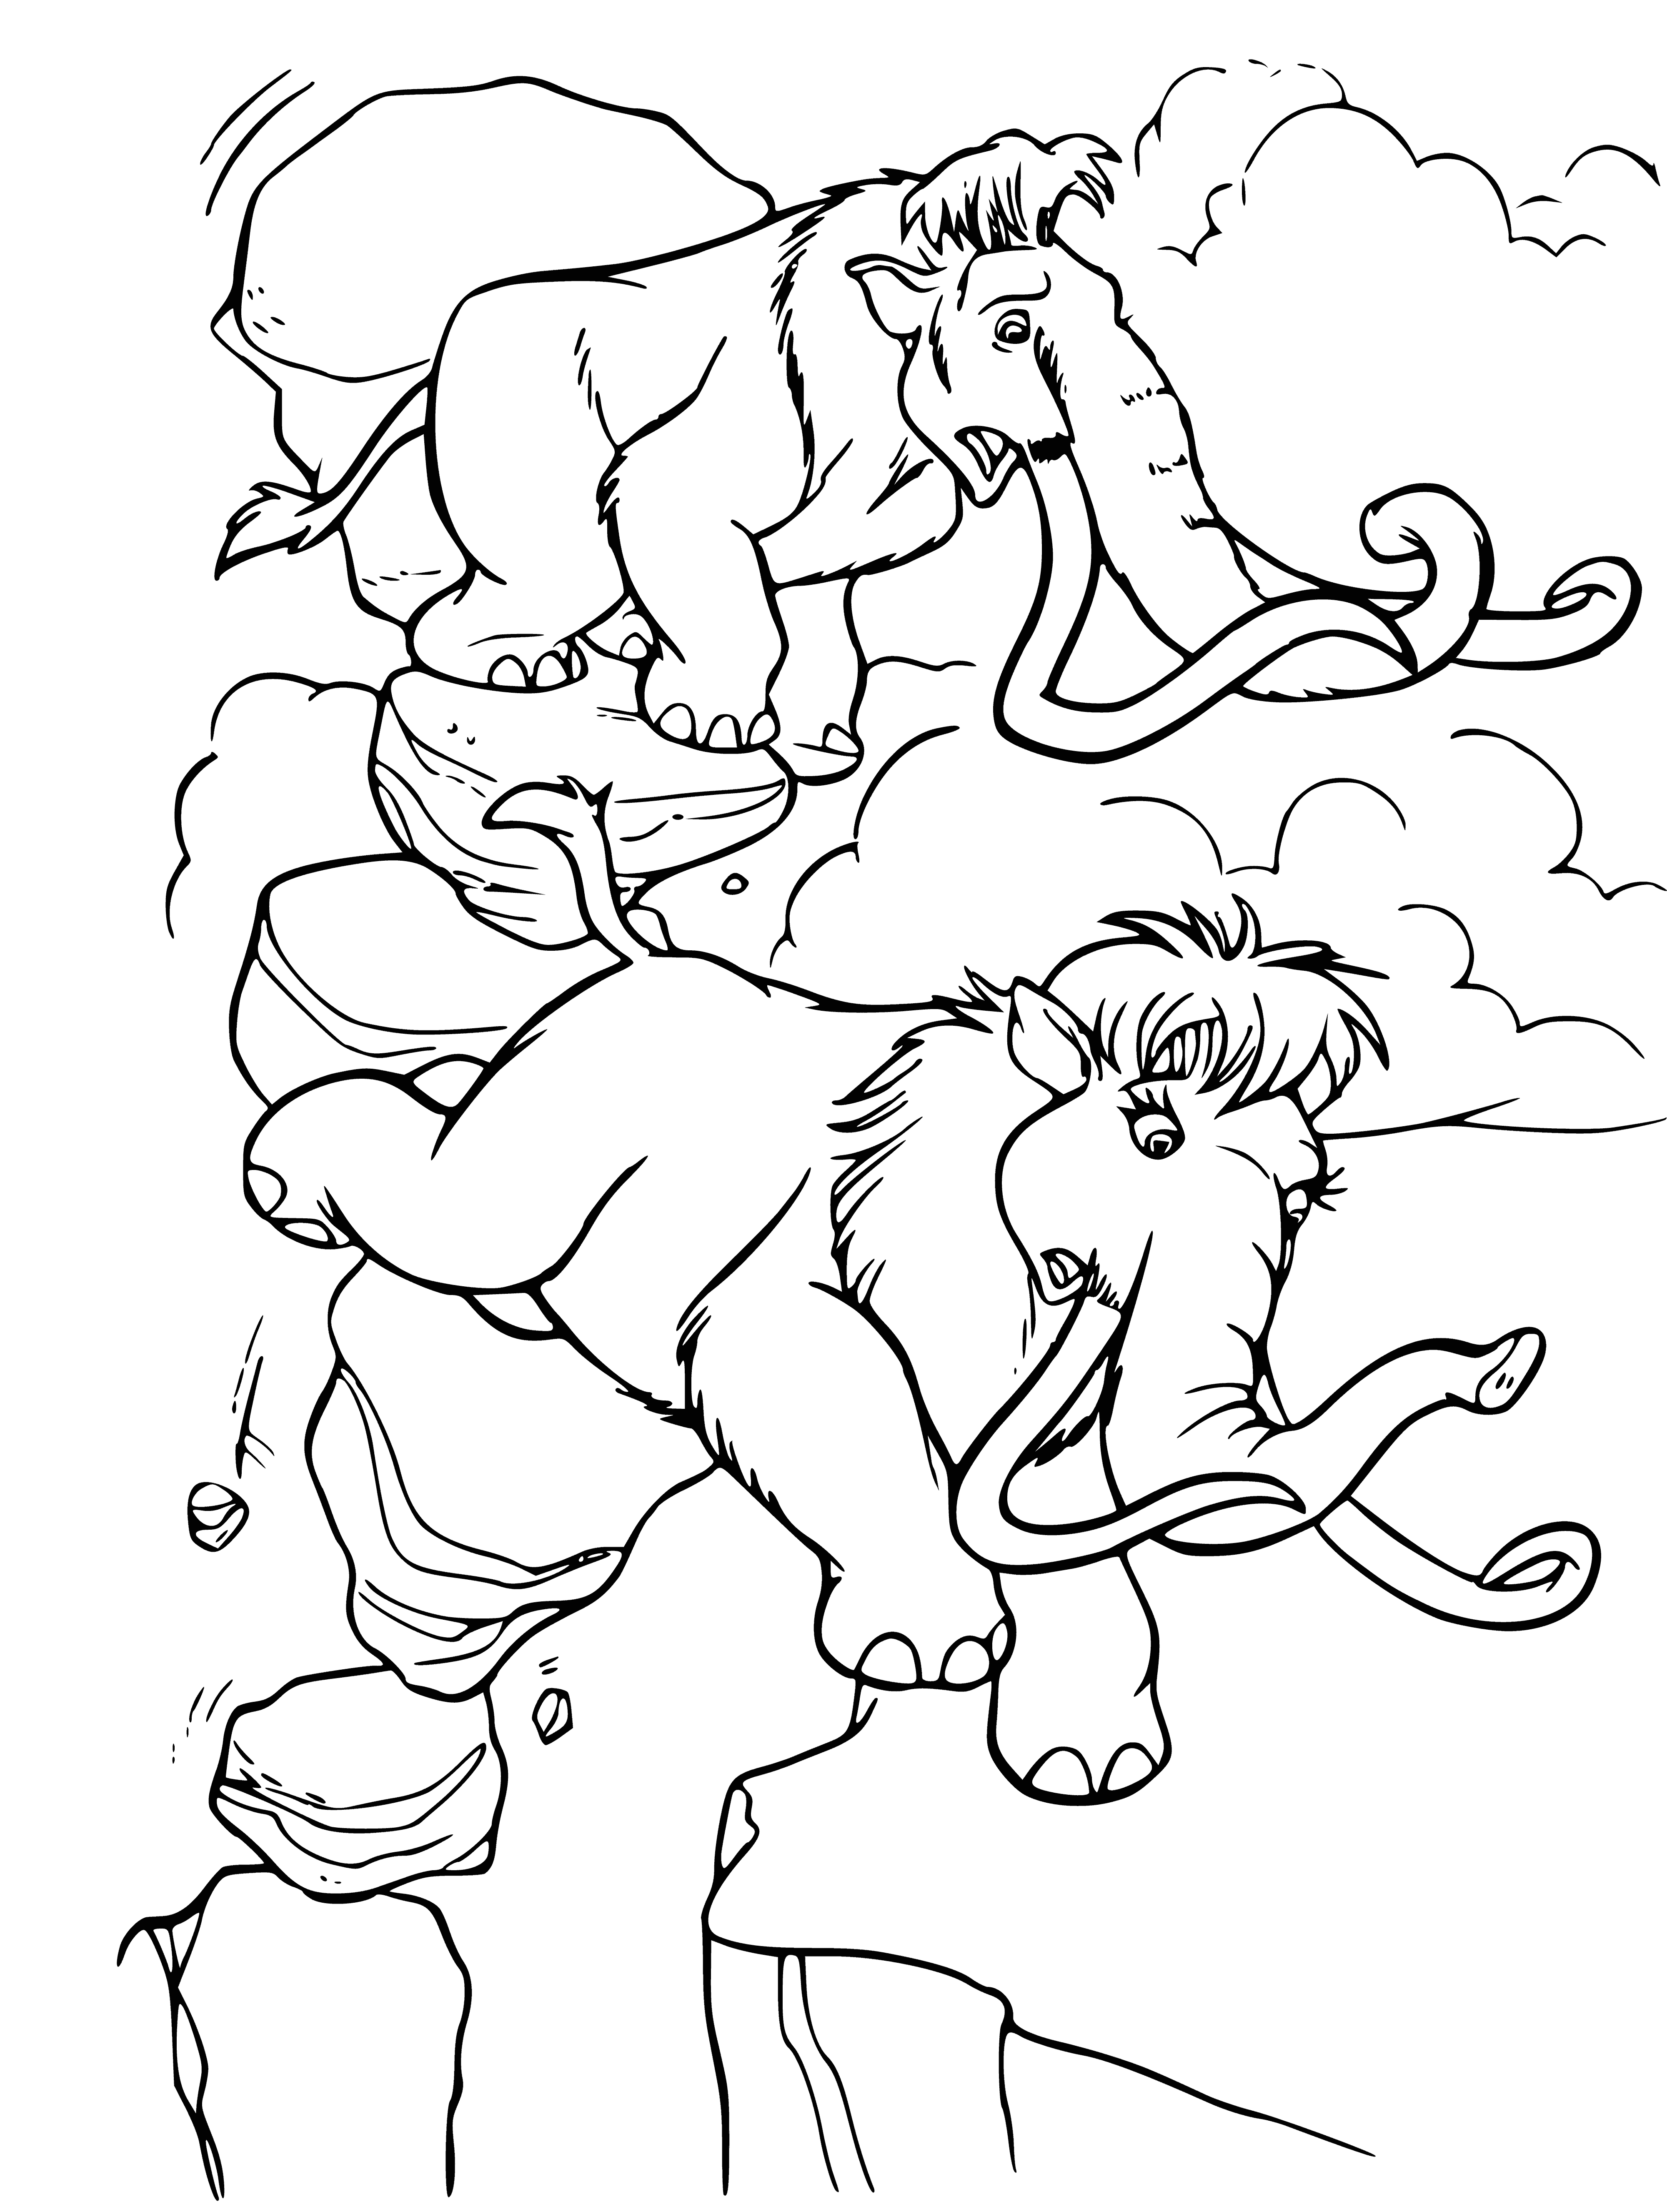 coloring page: Manny and Ellie saved during Ice Age and look at each other, hand-in-hand, in sun-lit background.